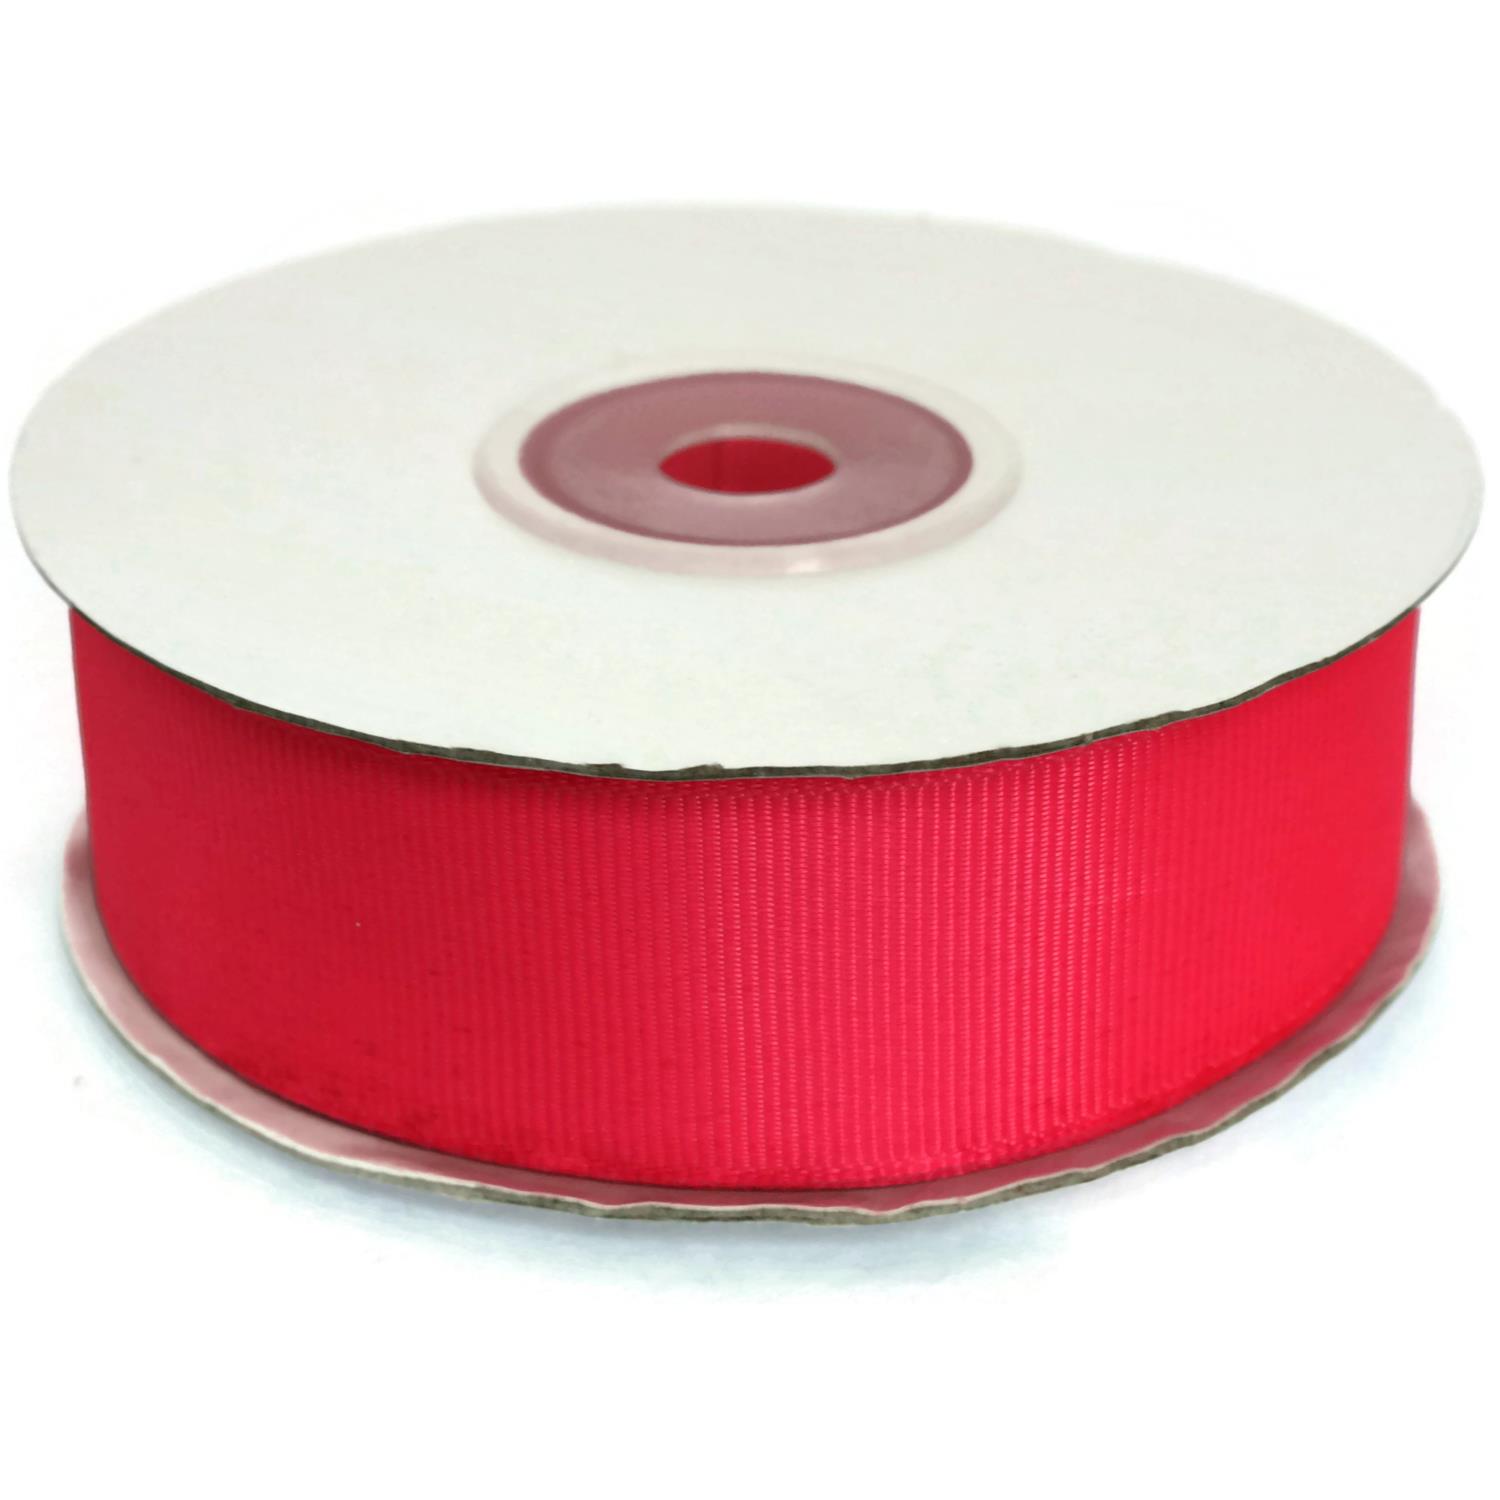 Ripsband 15mm breit, 20 Meter lang, Farbe: pink-himbeere #12